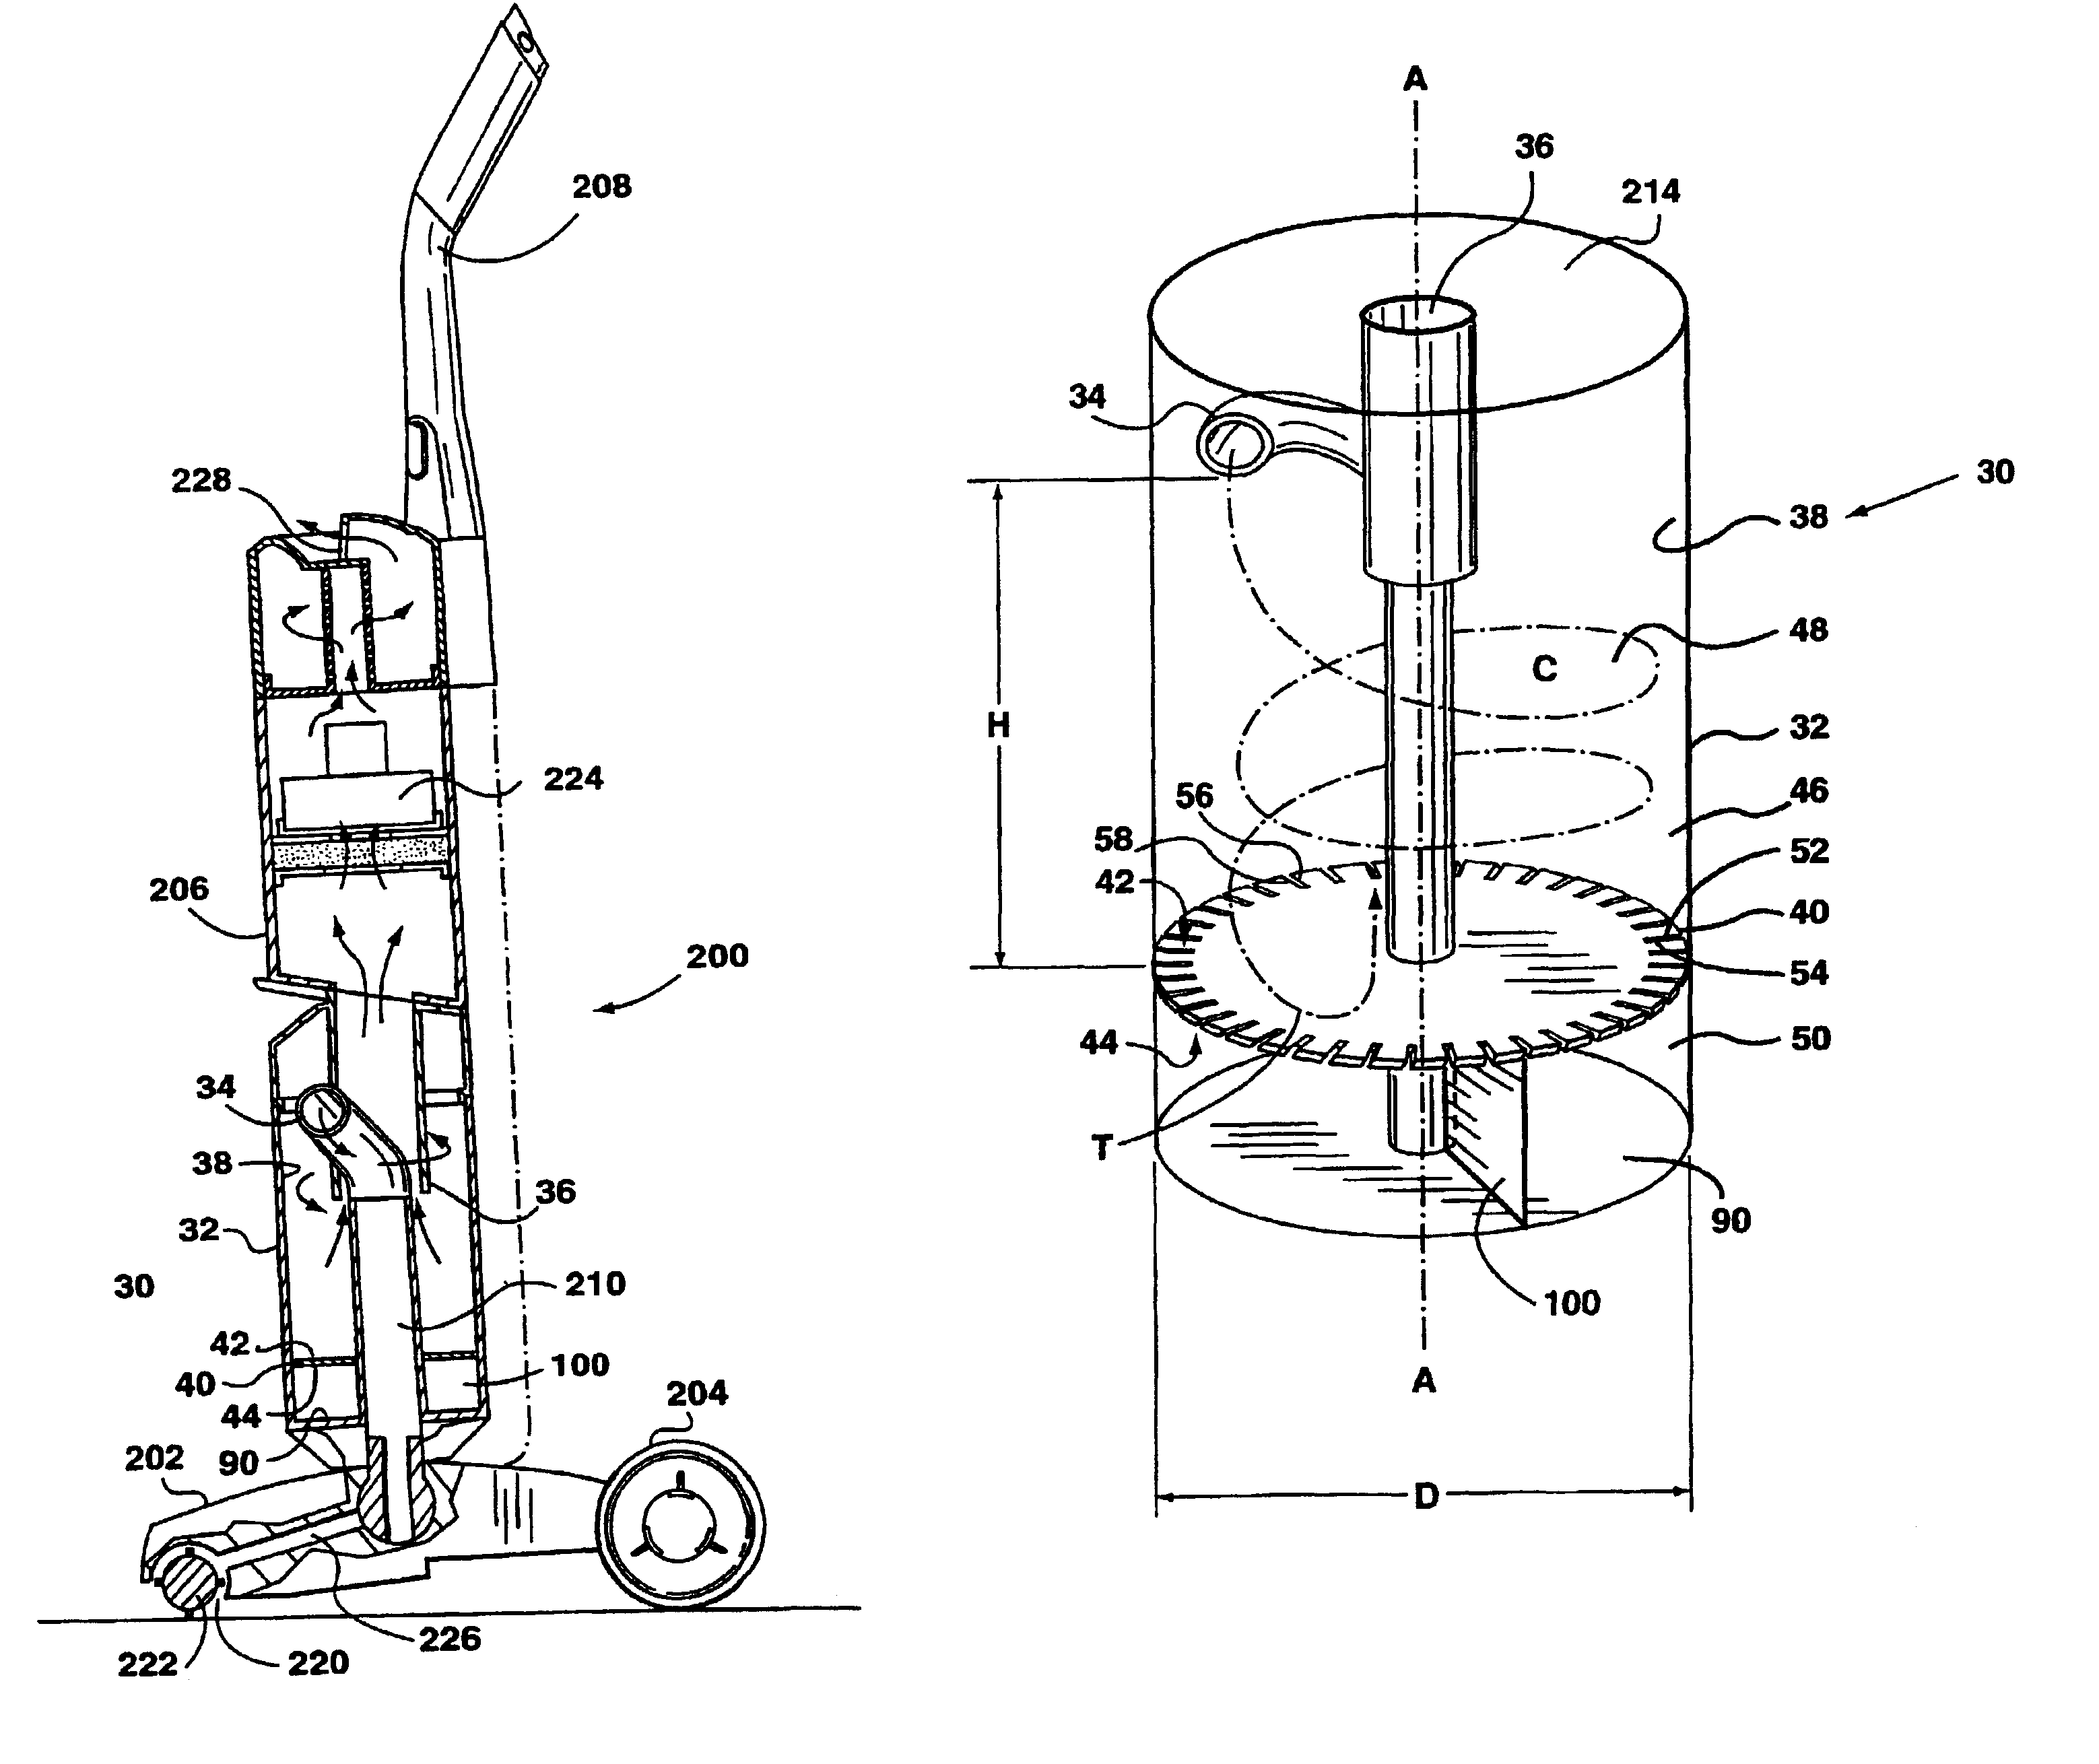 Apparatus and method for separating particles from a cyclonic fluid flow